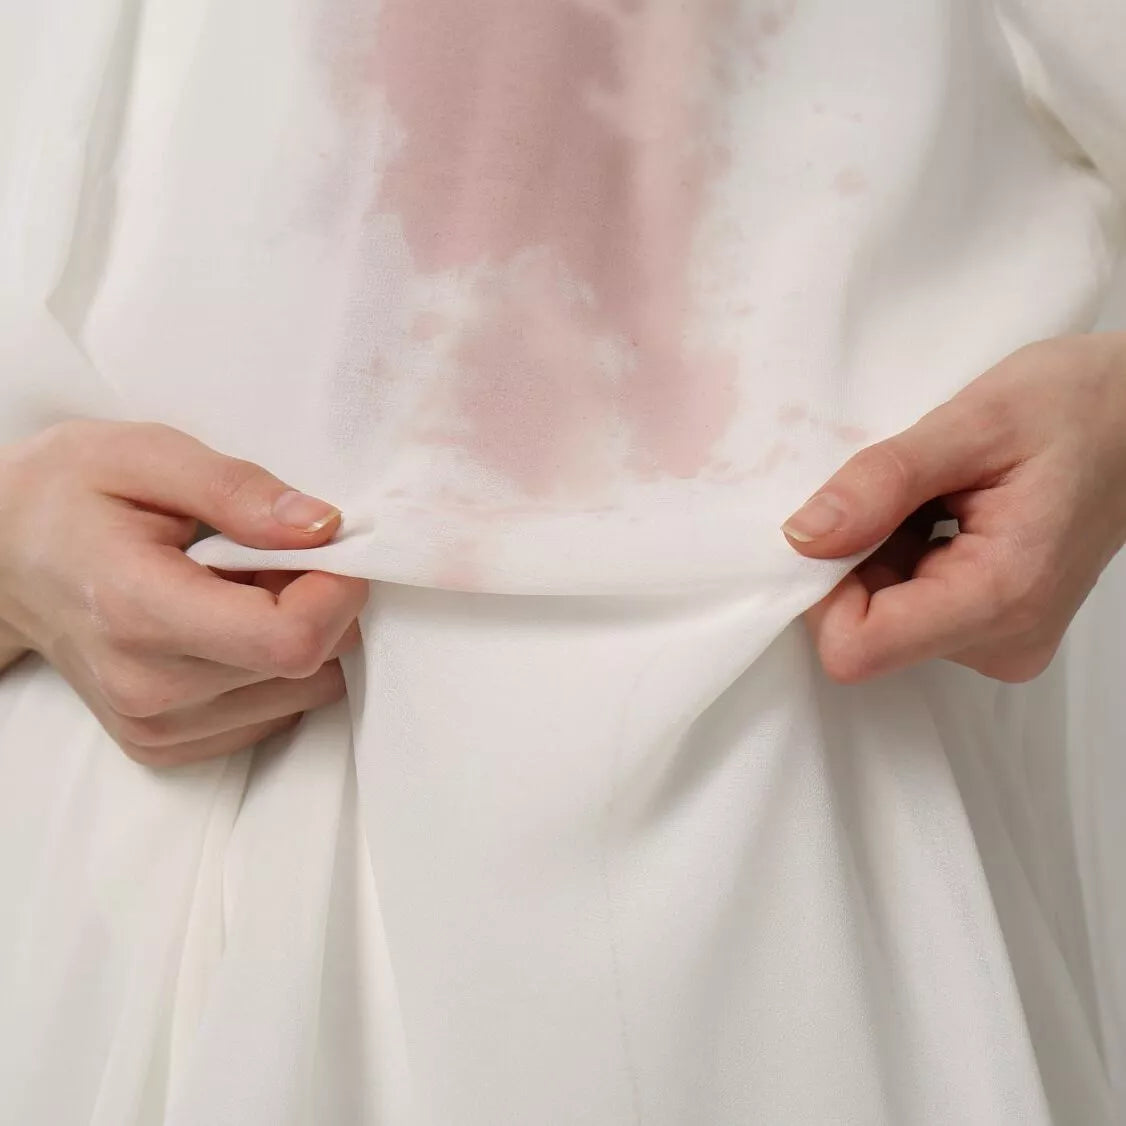 How to Remove Common Stains From Clothing With Baking Soda